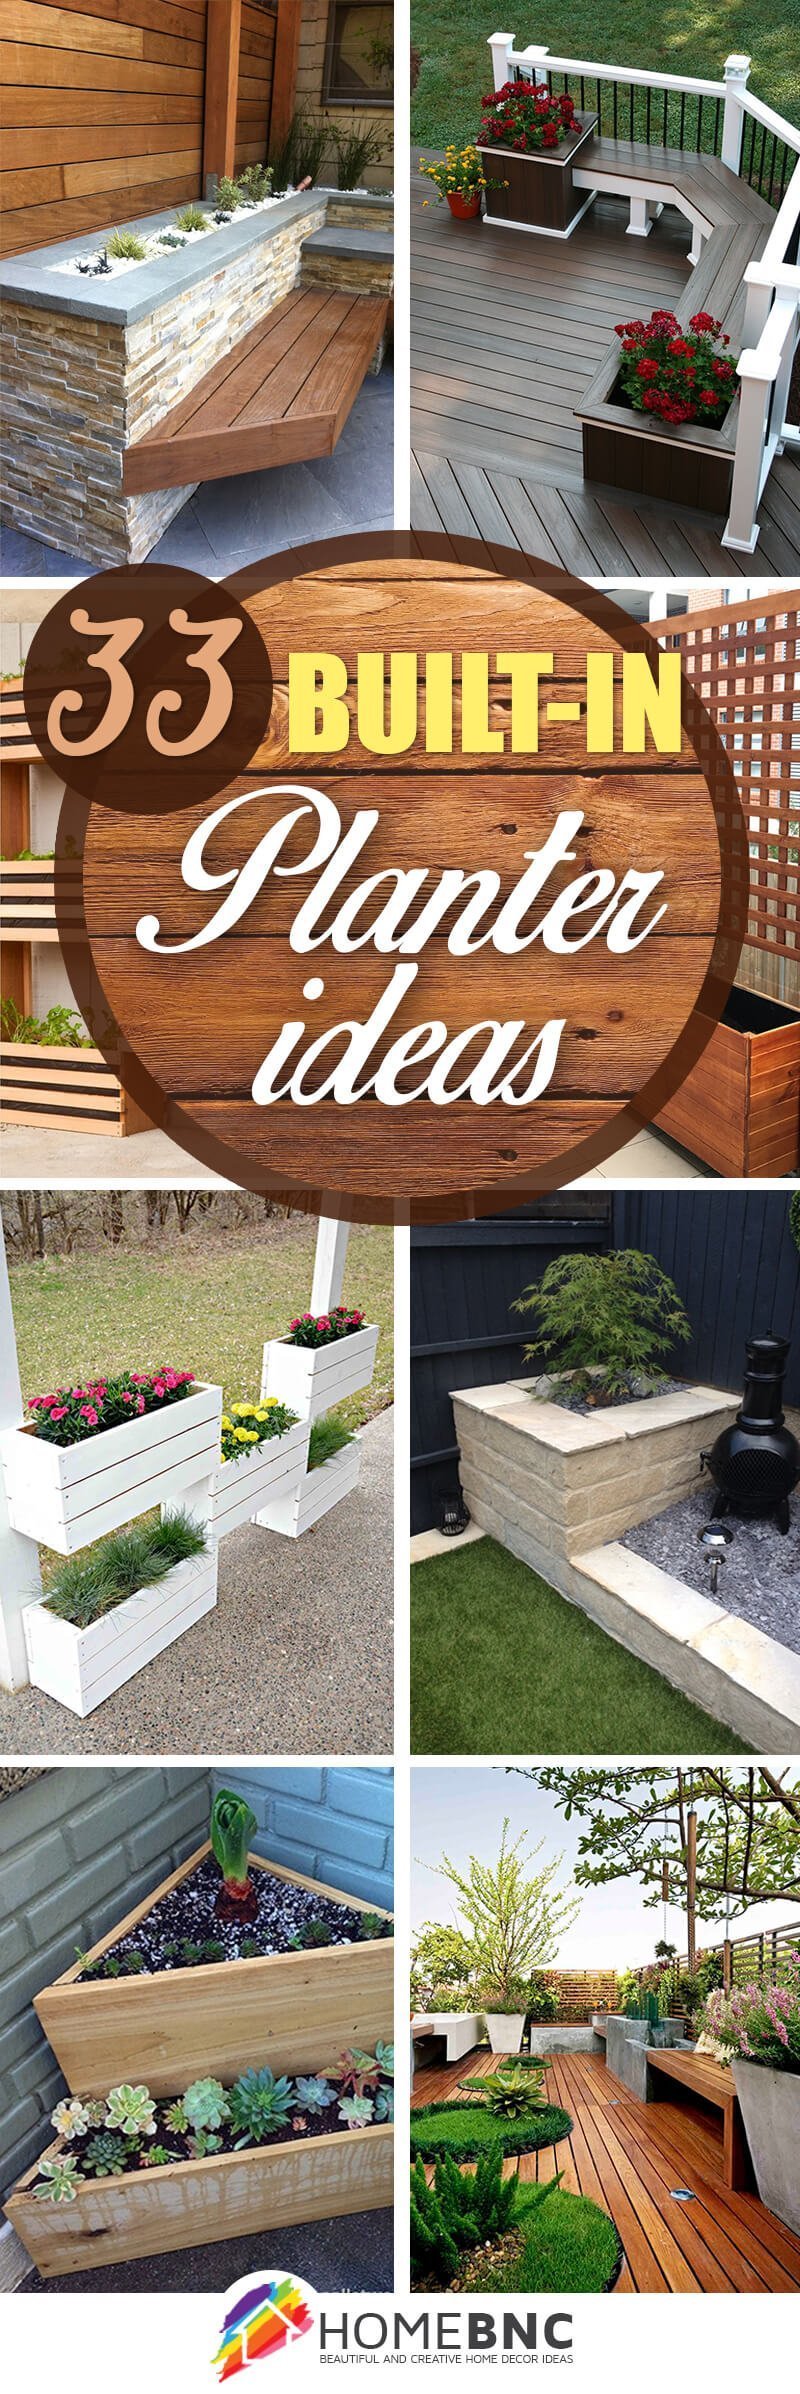 Built-In Planters